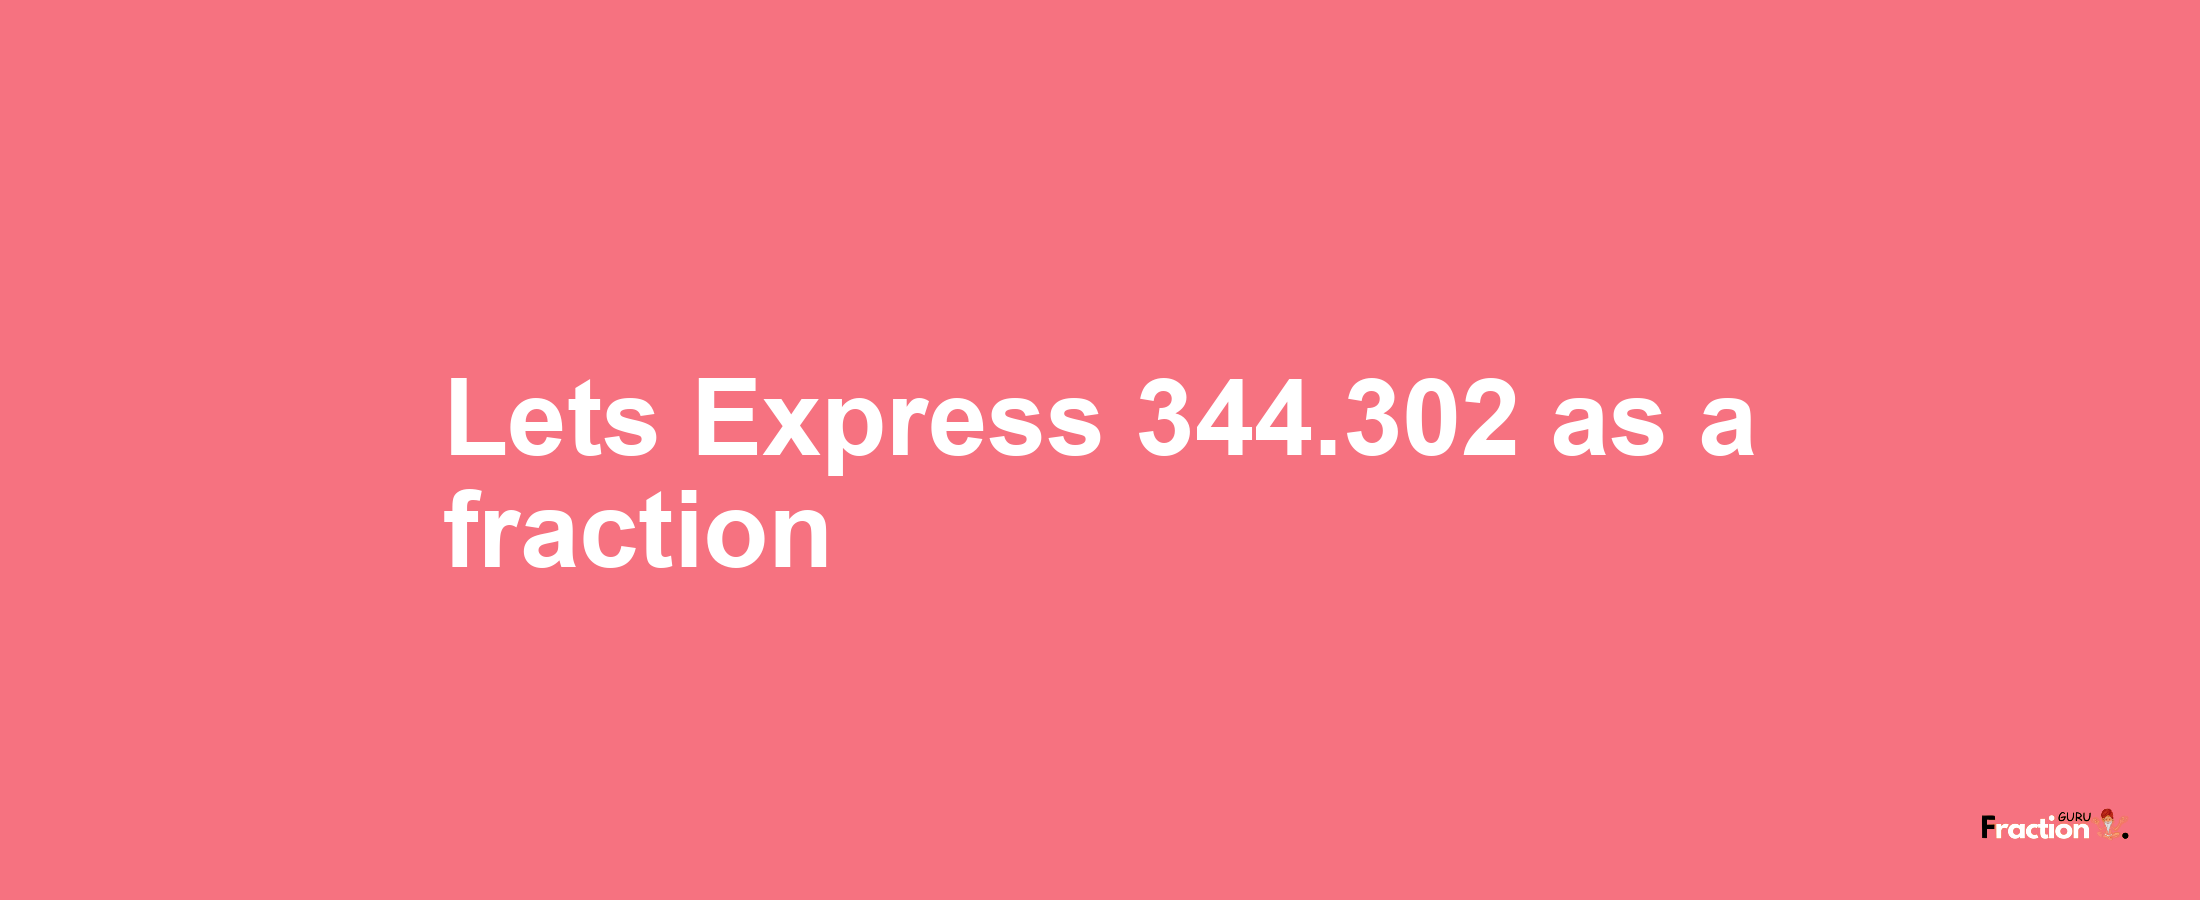 Lets Express 344.302 as afraction